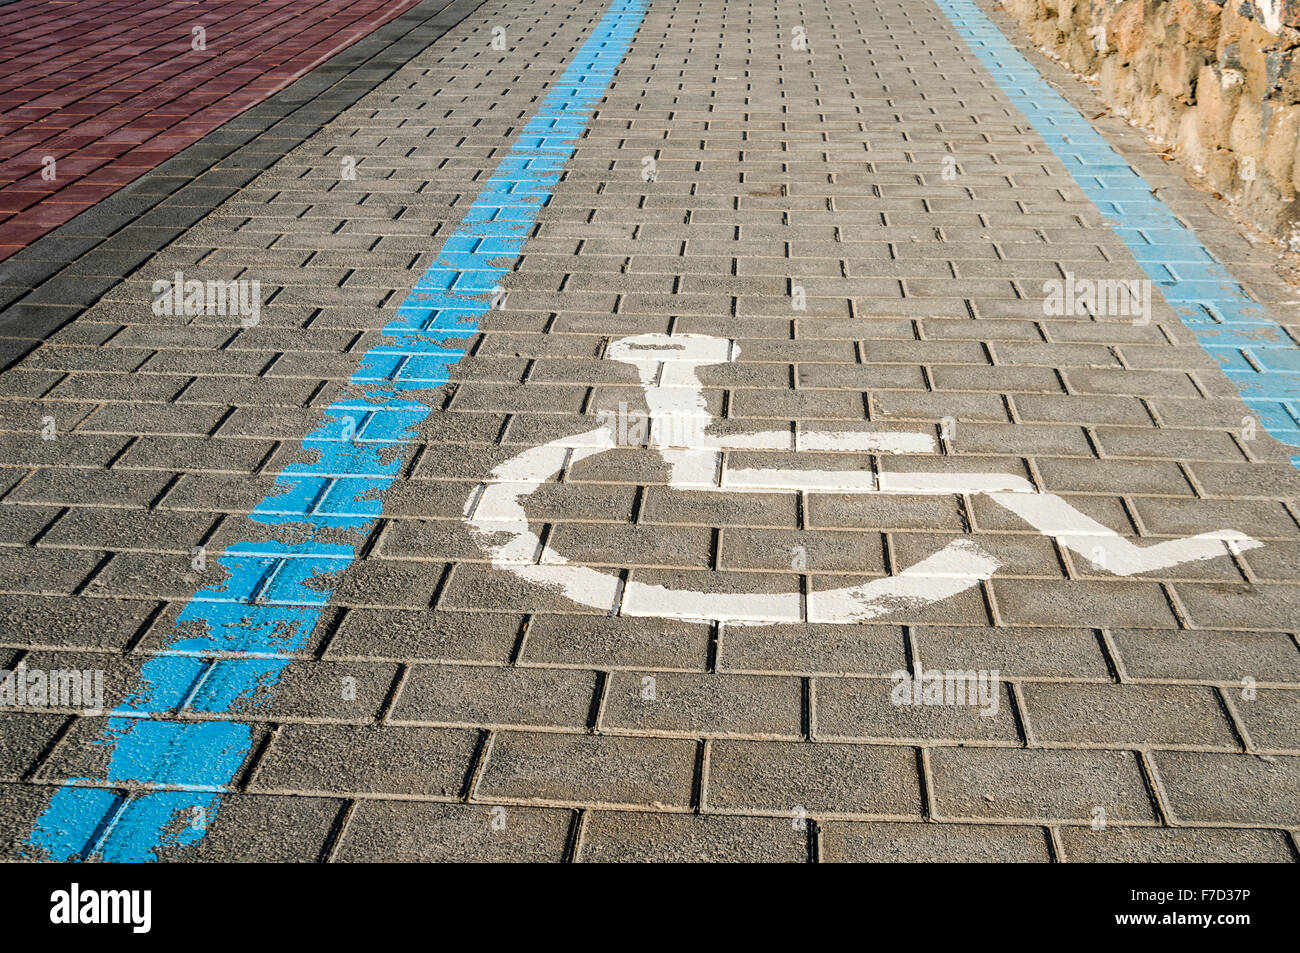 Brick footpath path pavement marked with lane area for disabled people in wheelchair wheelchairs Stock Photo